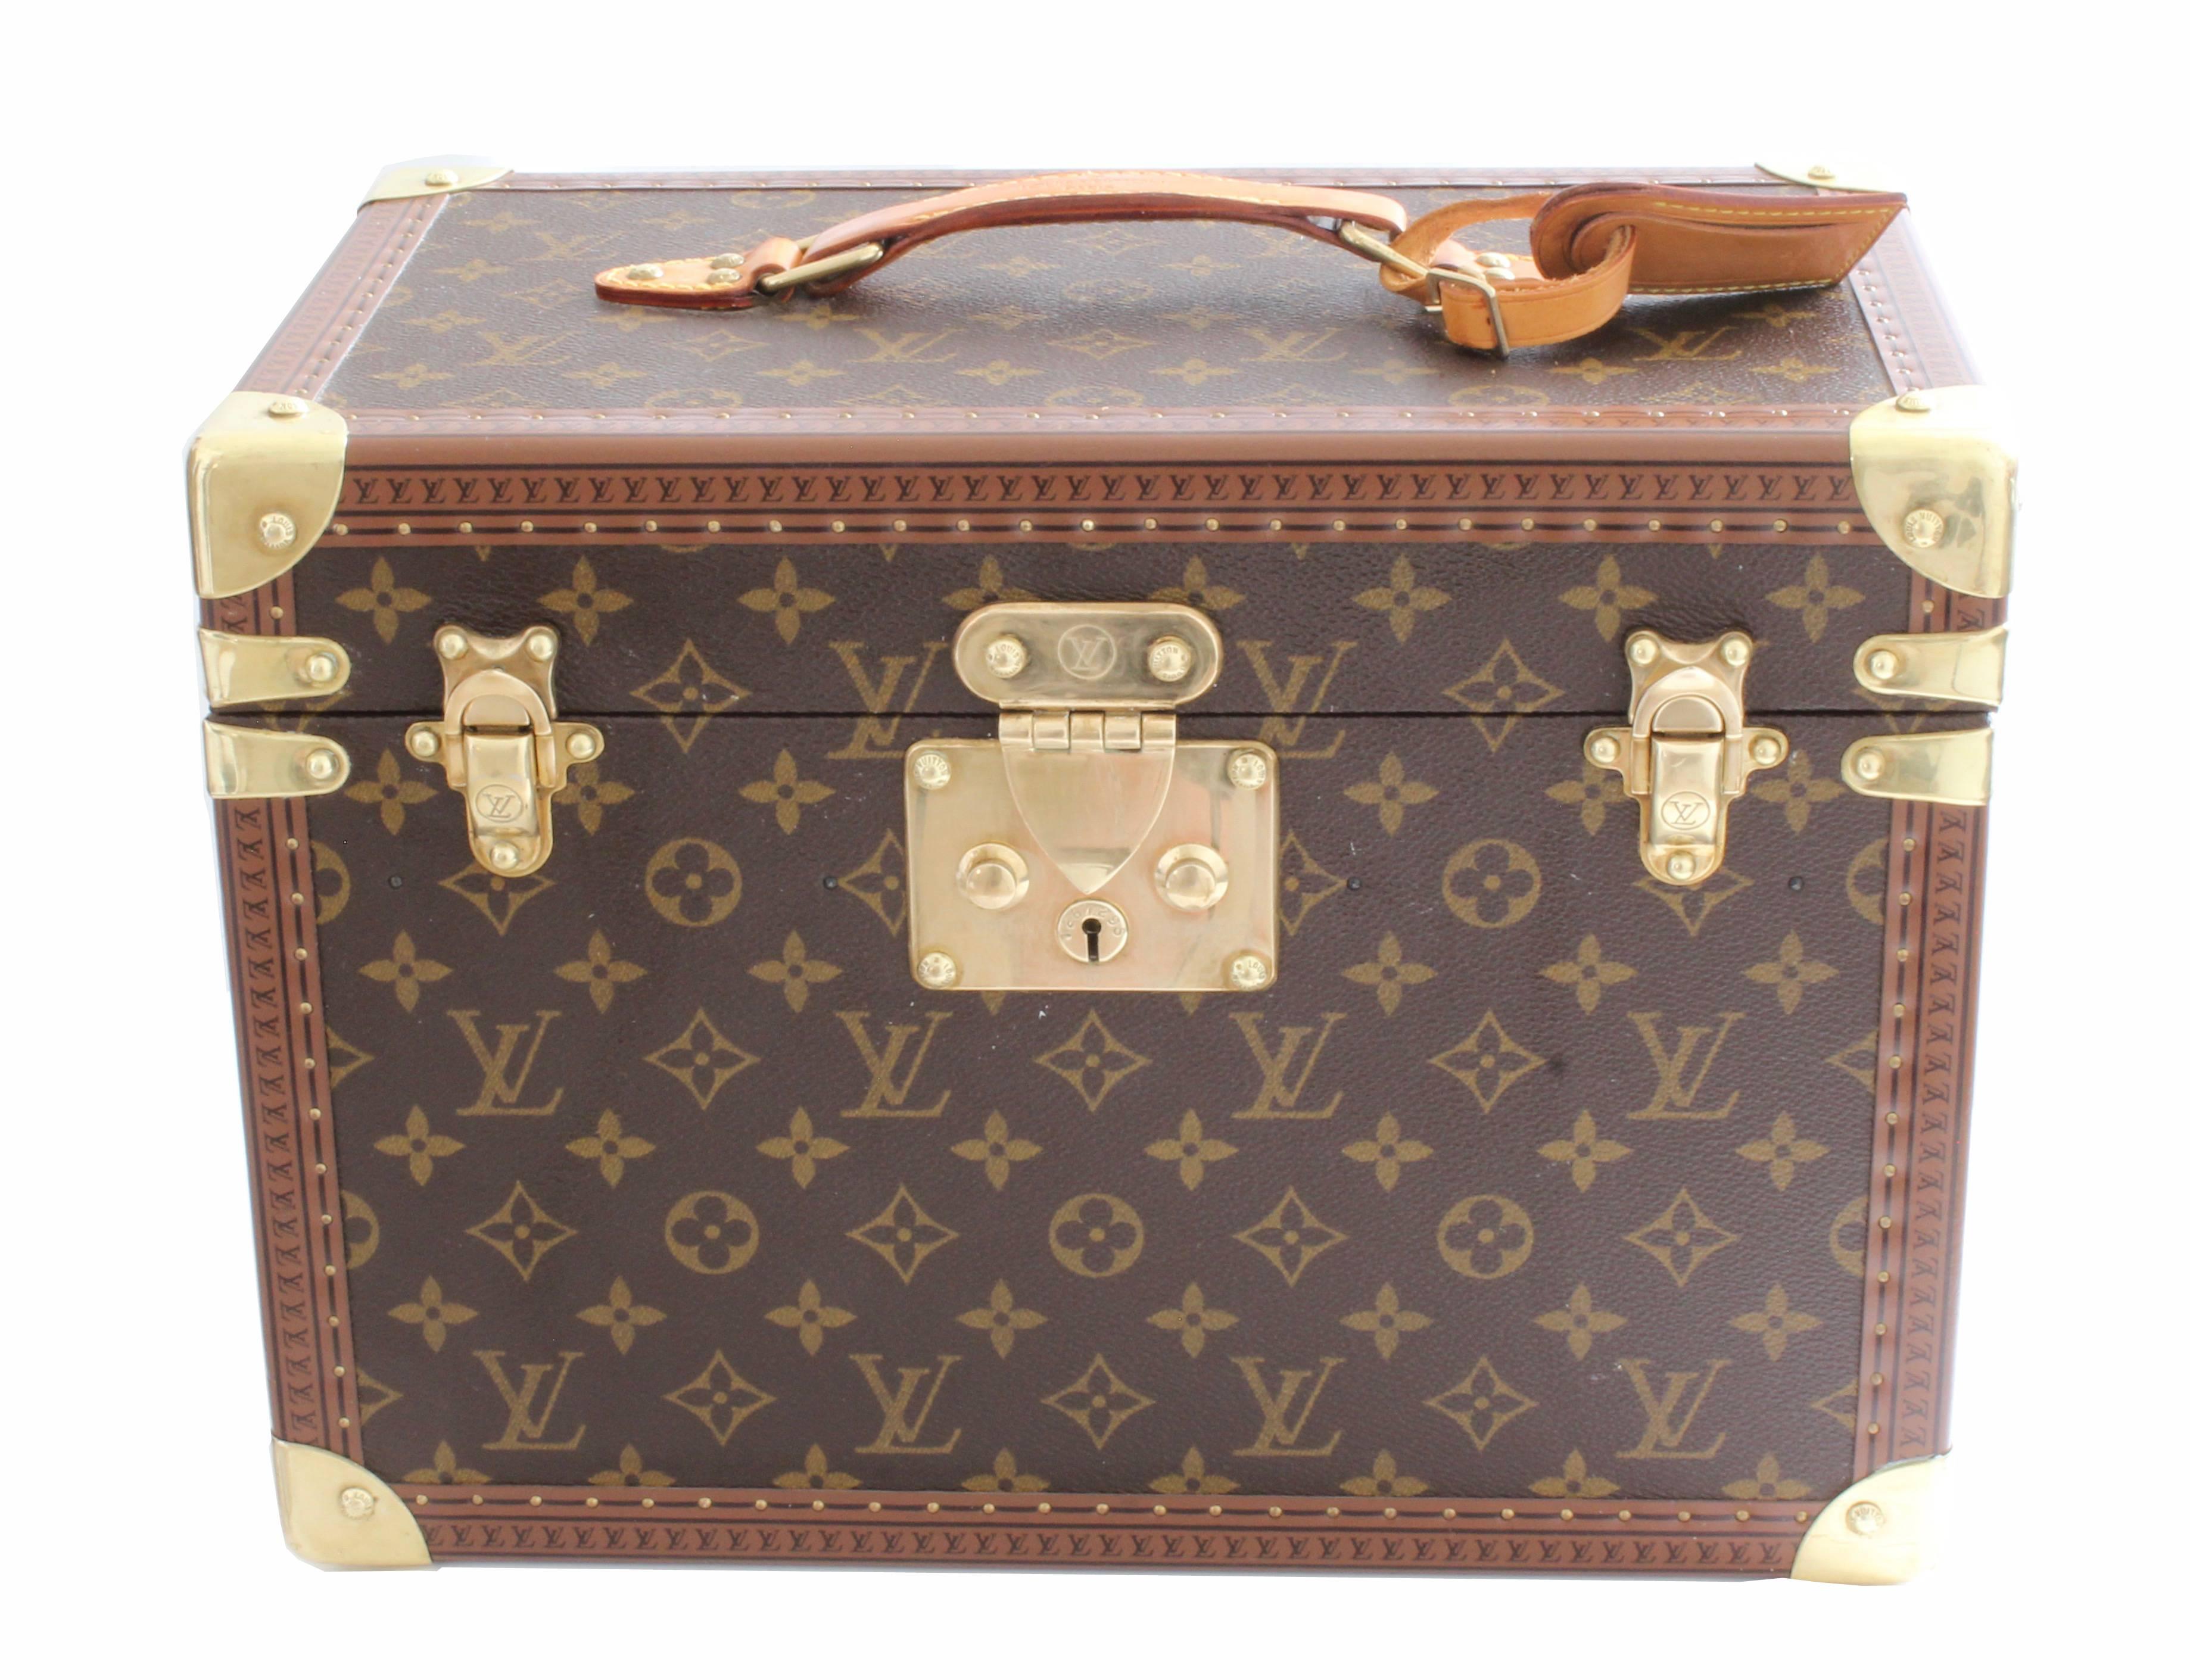 This fabulous cosmetics case was made by Louis Vuitton, most likely in the late 90s.  Coined the Boite Pharmacie or Cosmetics Box, it's made of Louis Vuitton's monogram canvas and features an insert for your toiletry bottles, along with a removable